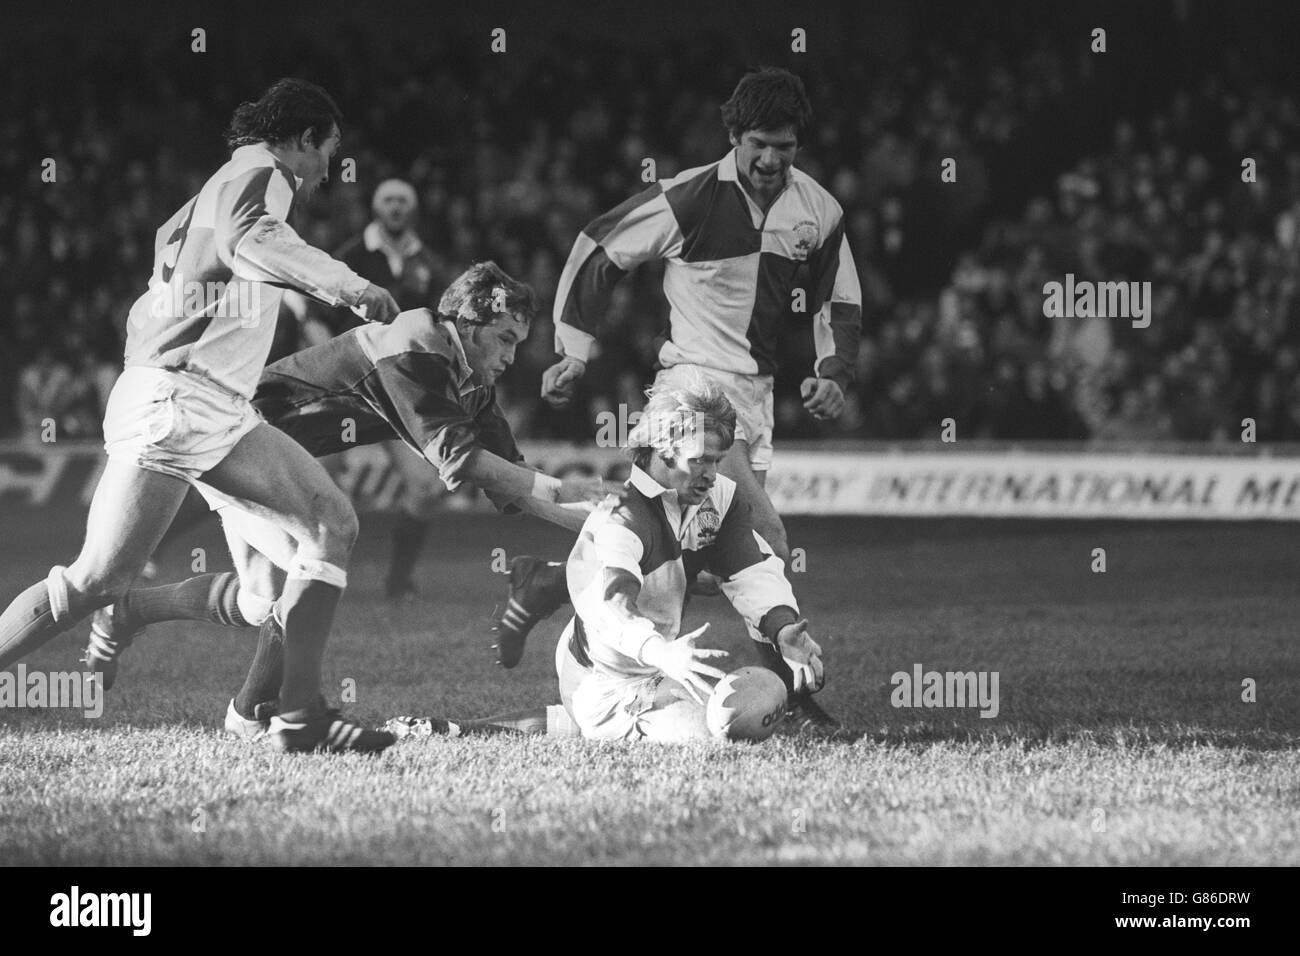 Steve Fenwick, captain of England/Wales, is tackled by John Robbie, of Scotland/Ireland, at Cardiff Arms Park. Also in the picture are Terry Holmes (l) and Gareth Williams. England/Wales won 37-33. Stock Photo